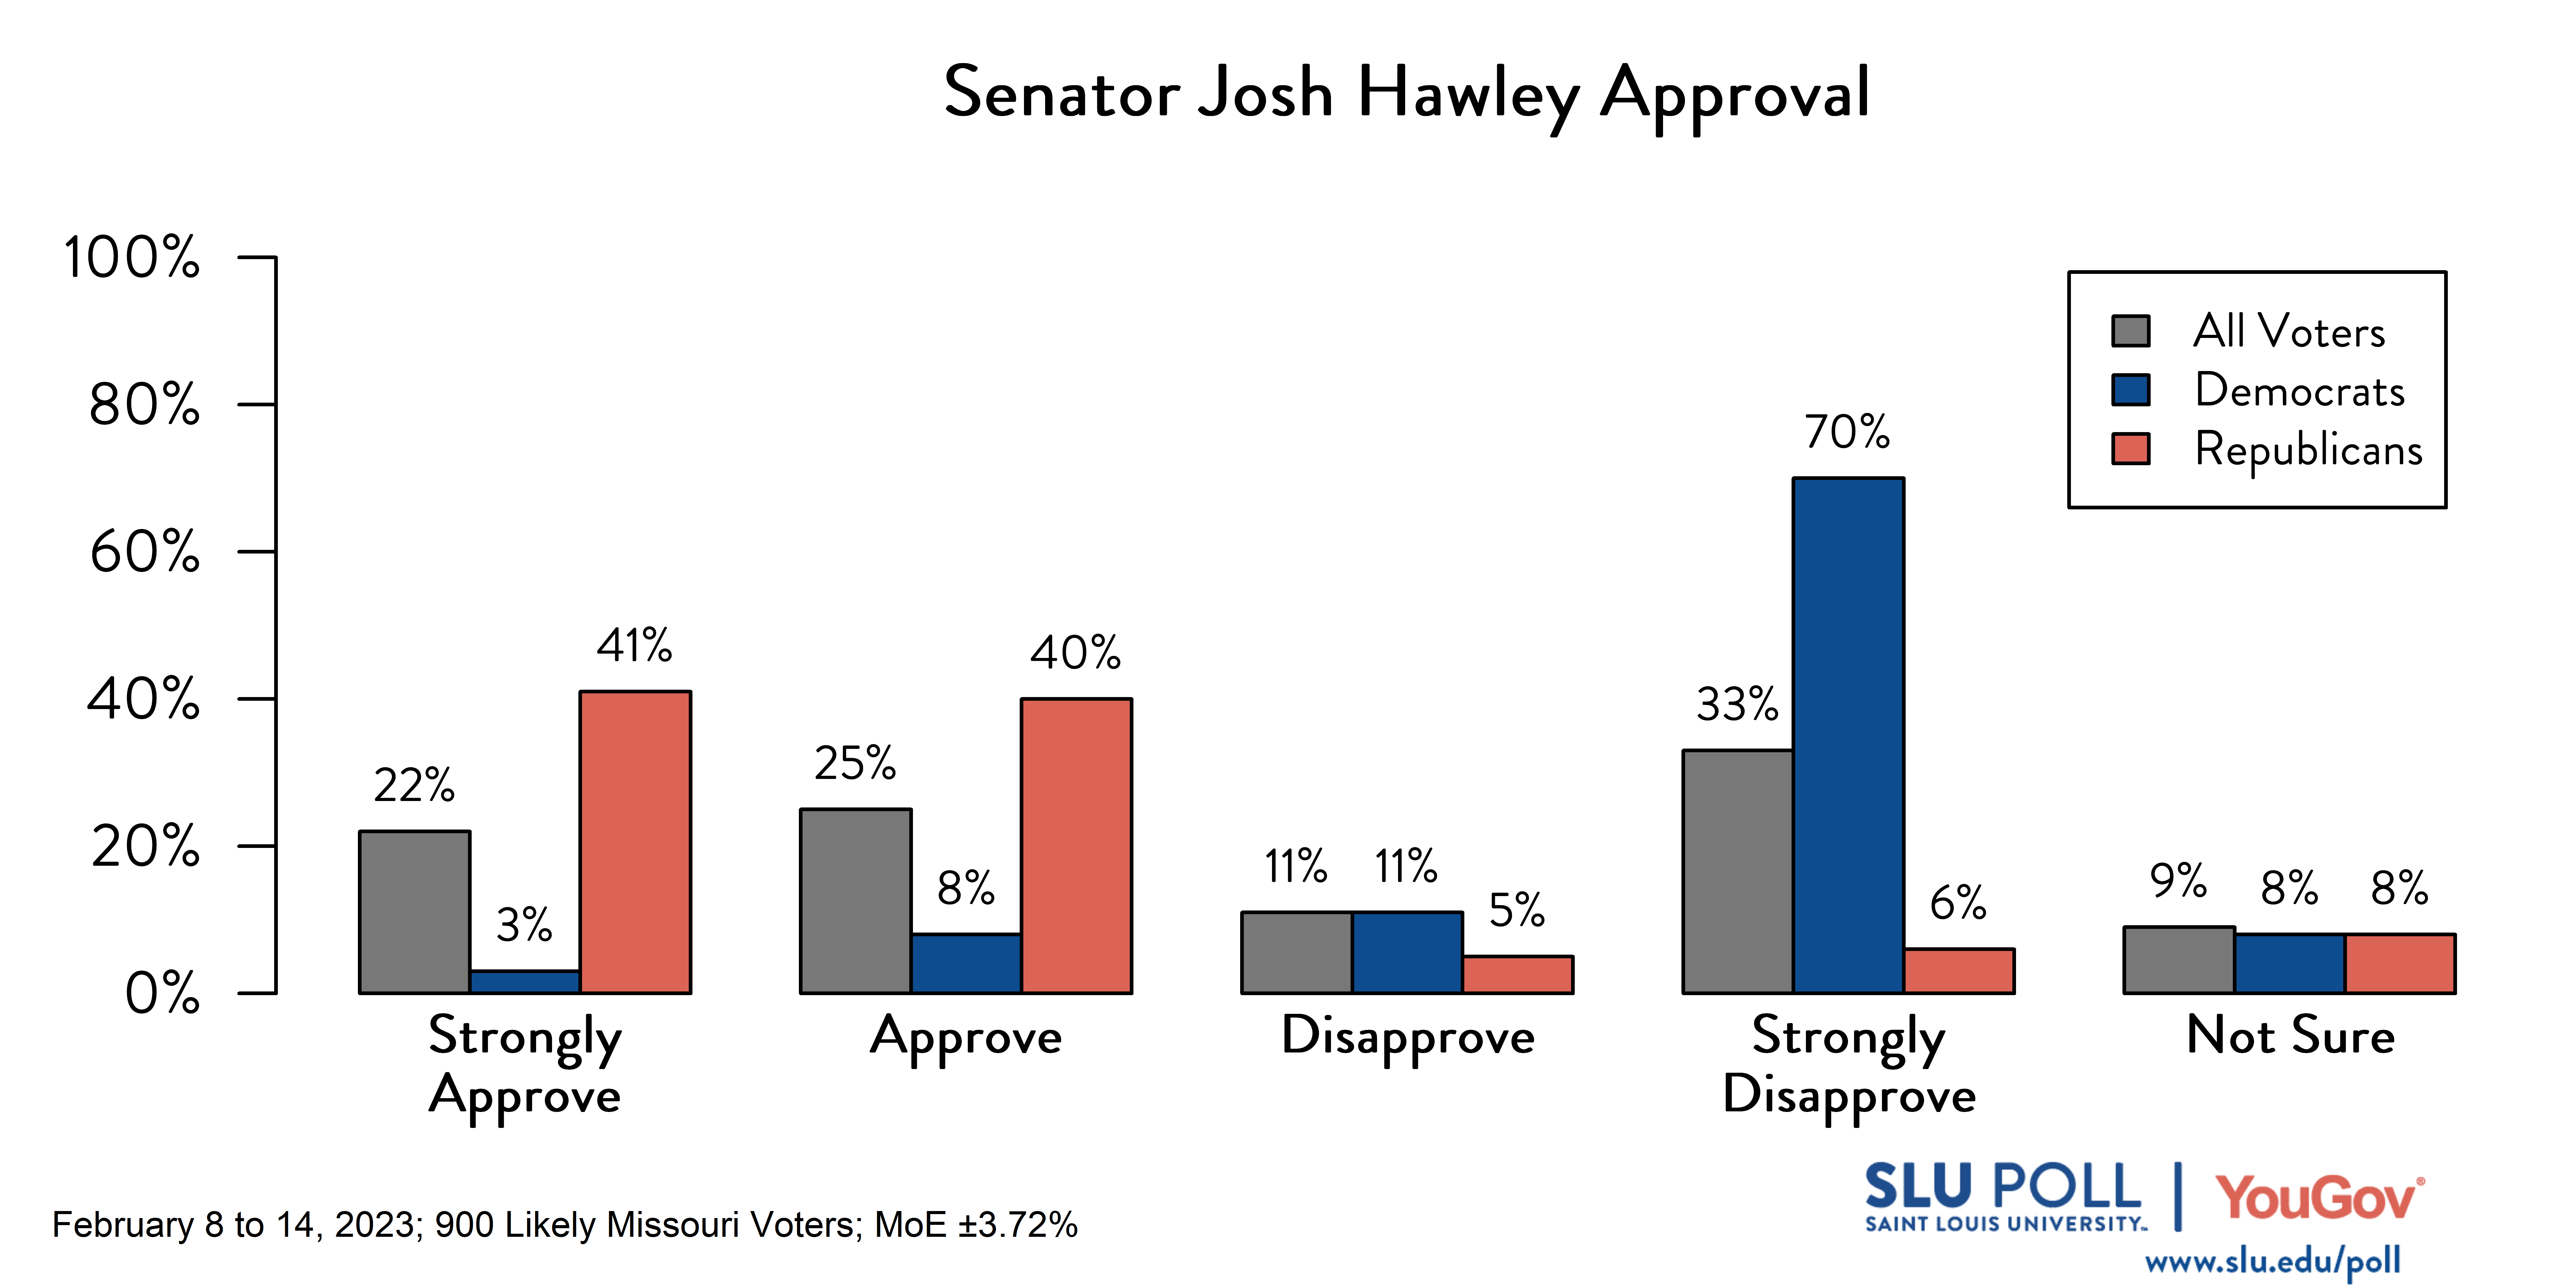 Likely voters' responses to 'Do you approve or disapprove of the way each is doing their job: Senator Josh Hawley?': 22% Strongly approve, 25% Approve, 11% Disapprove, 33% Strongly disapprove, and 9% Not sure. Democratic voters' responses: ' 3% Strongly approve, 8% Approve, 11% Disapprove, 70% Strongly disapprove, and 8% Not sure. Republican voters' responses: 41% Strongly approve, 40% Approve, 5% Disapprove, 6% Strongly disapprove, and 8% Not sure. 